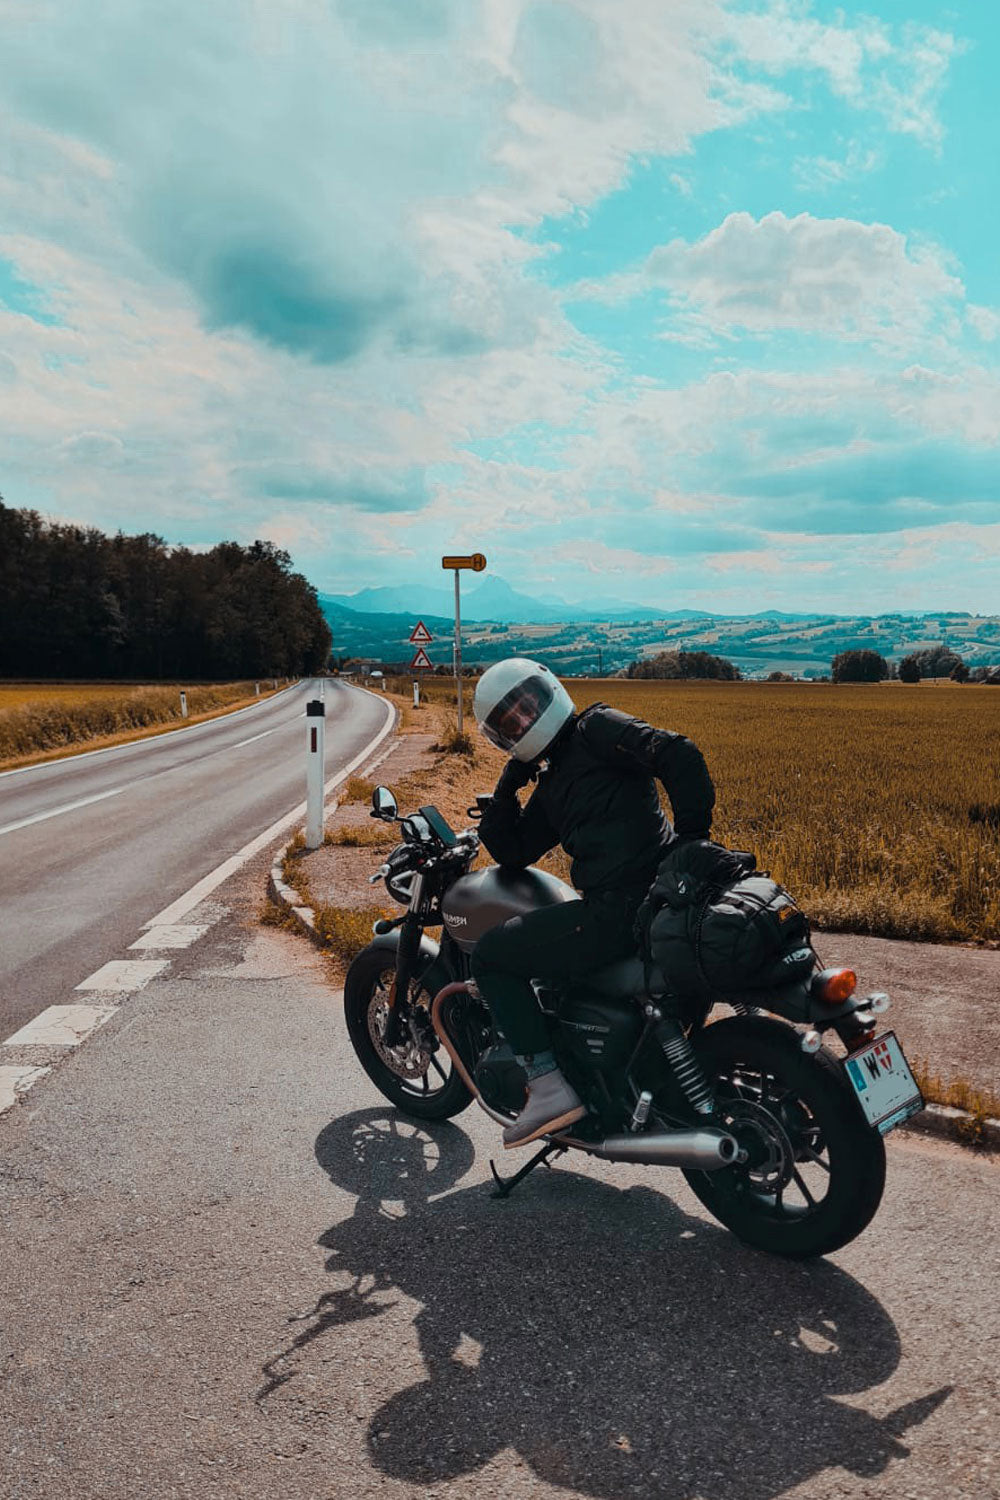 lena bartalszky riding motorcycles in vienna